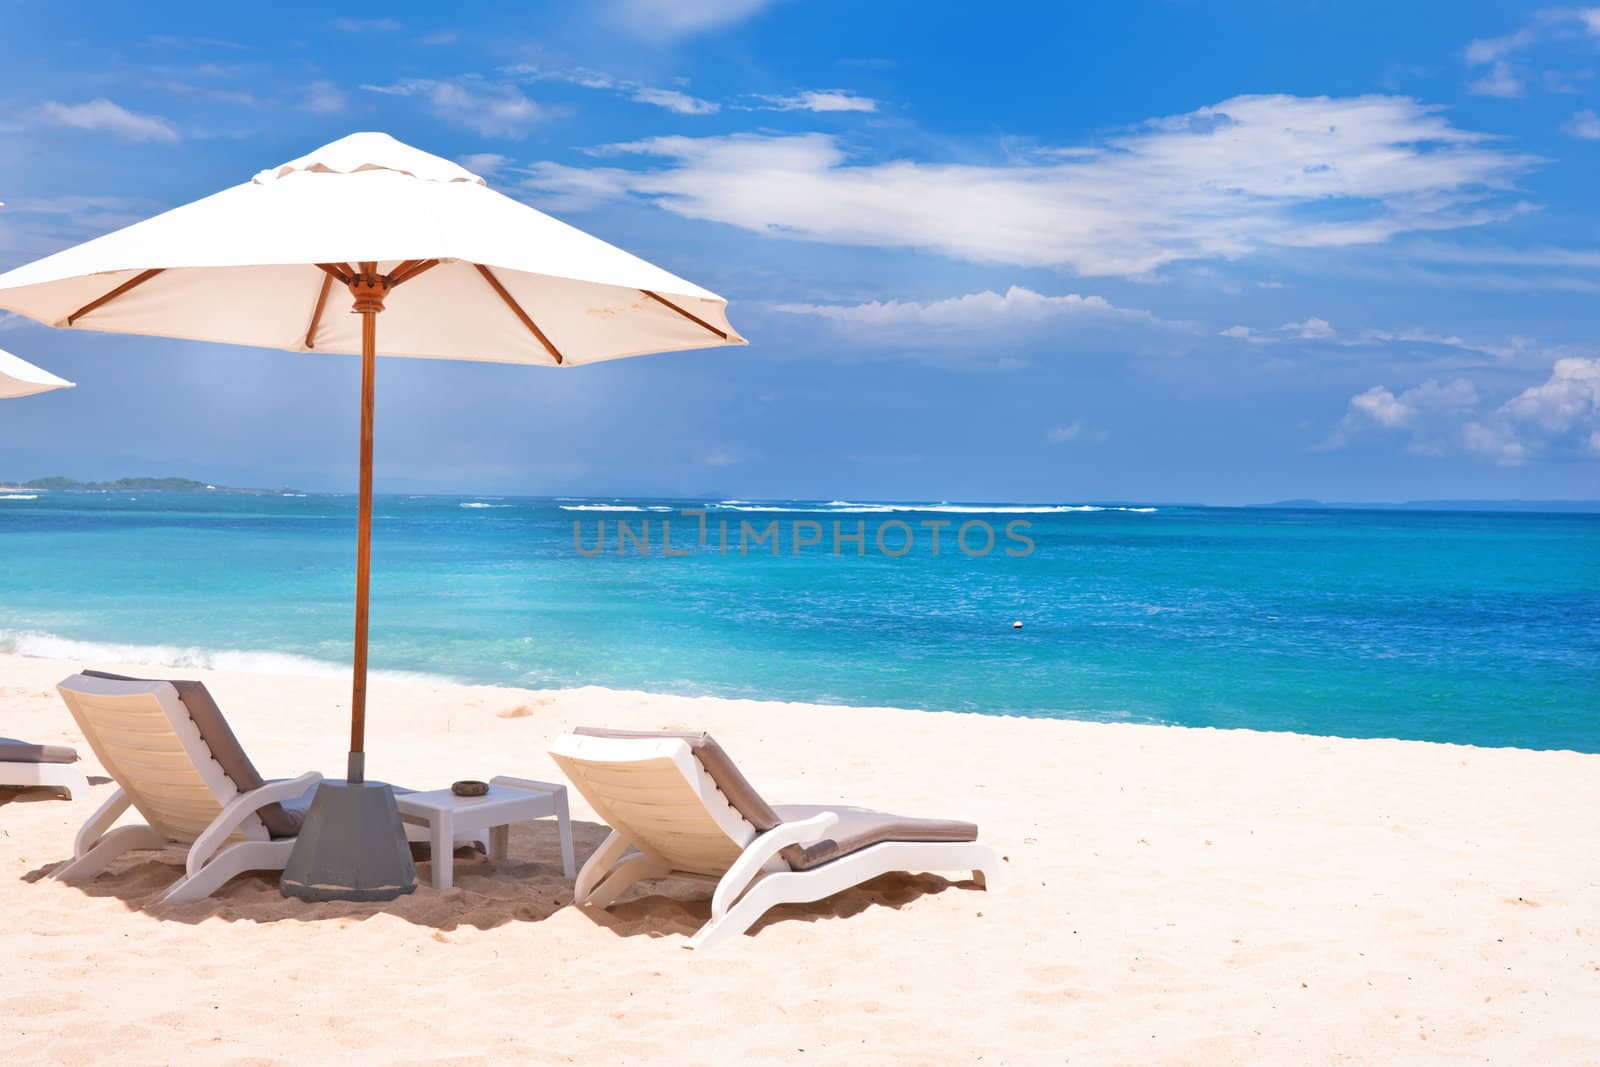 Tranquil beach scene with umbrella and lounge chairs